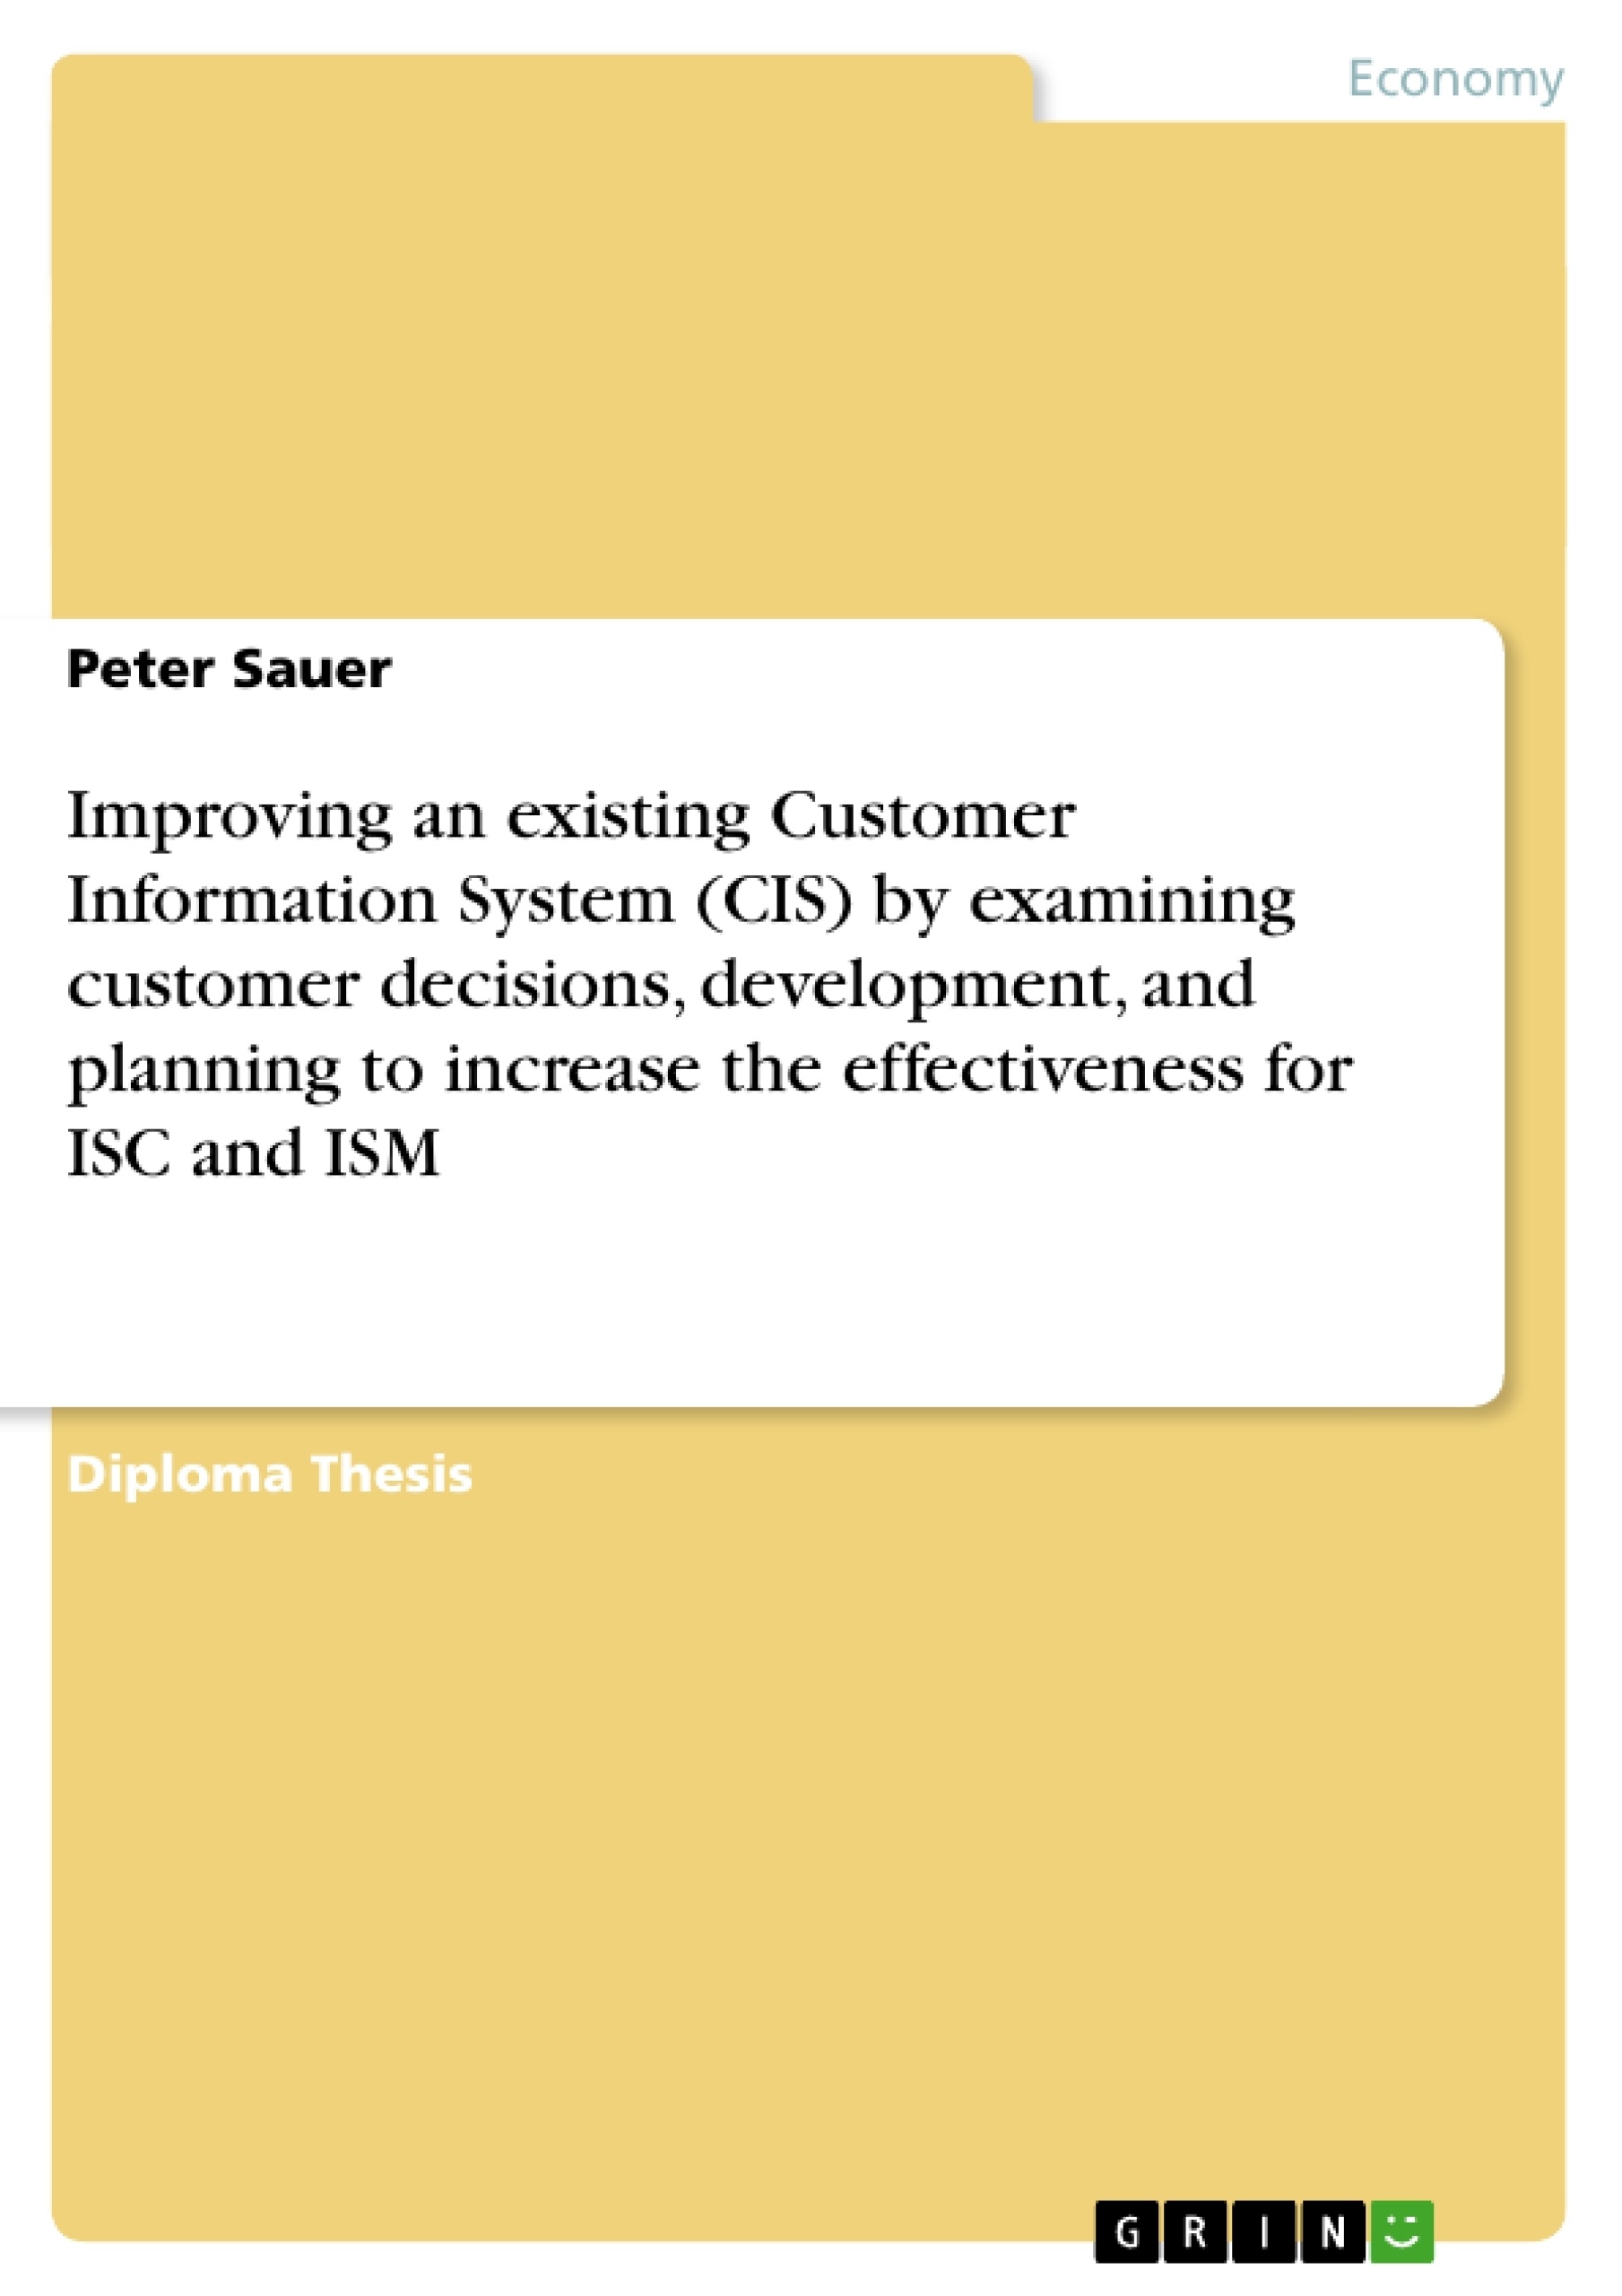 Title: Improving an existing Customer Information System (CIS) by examining customer decisions, development, and planning to increase the effectiveness for ISC and ISM